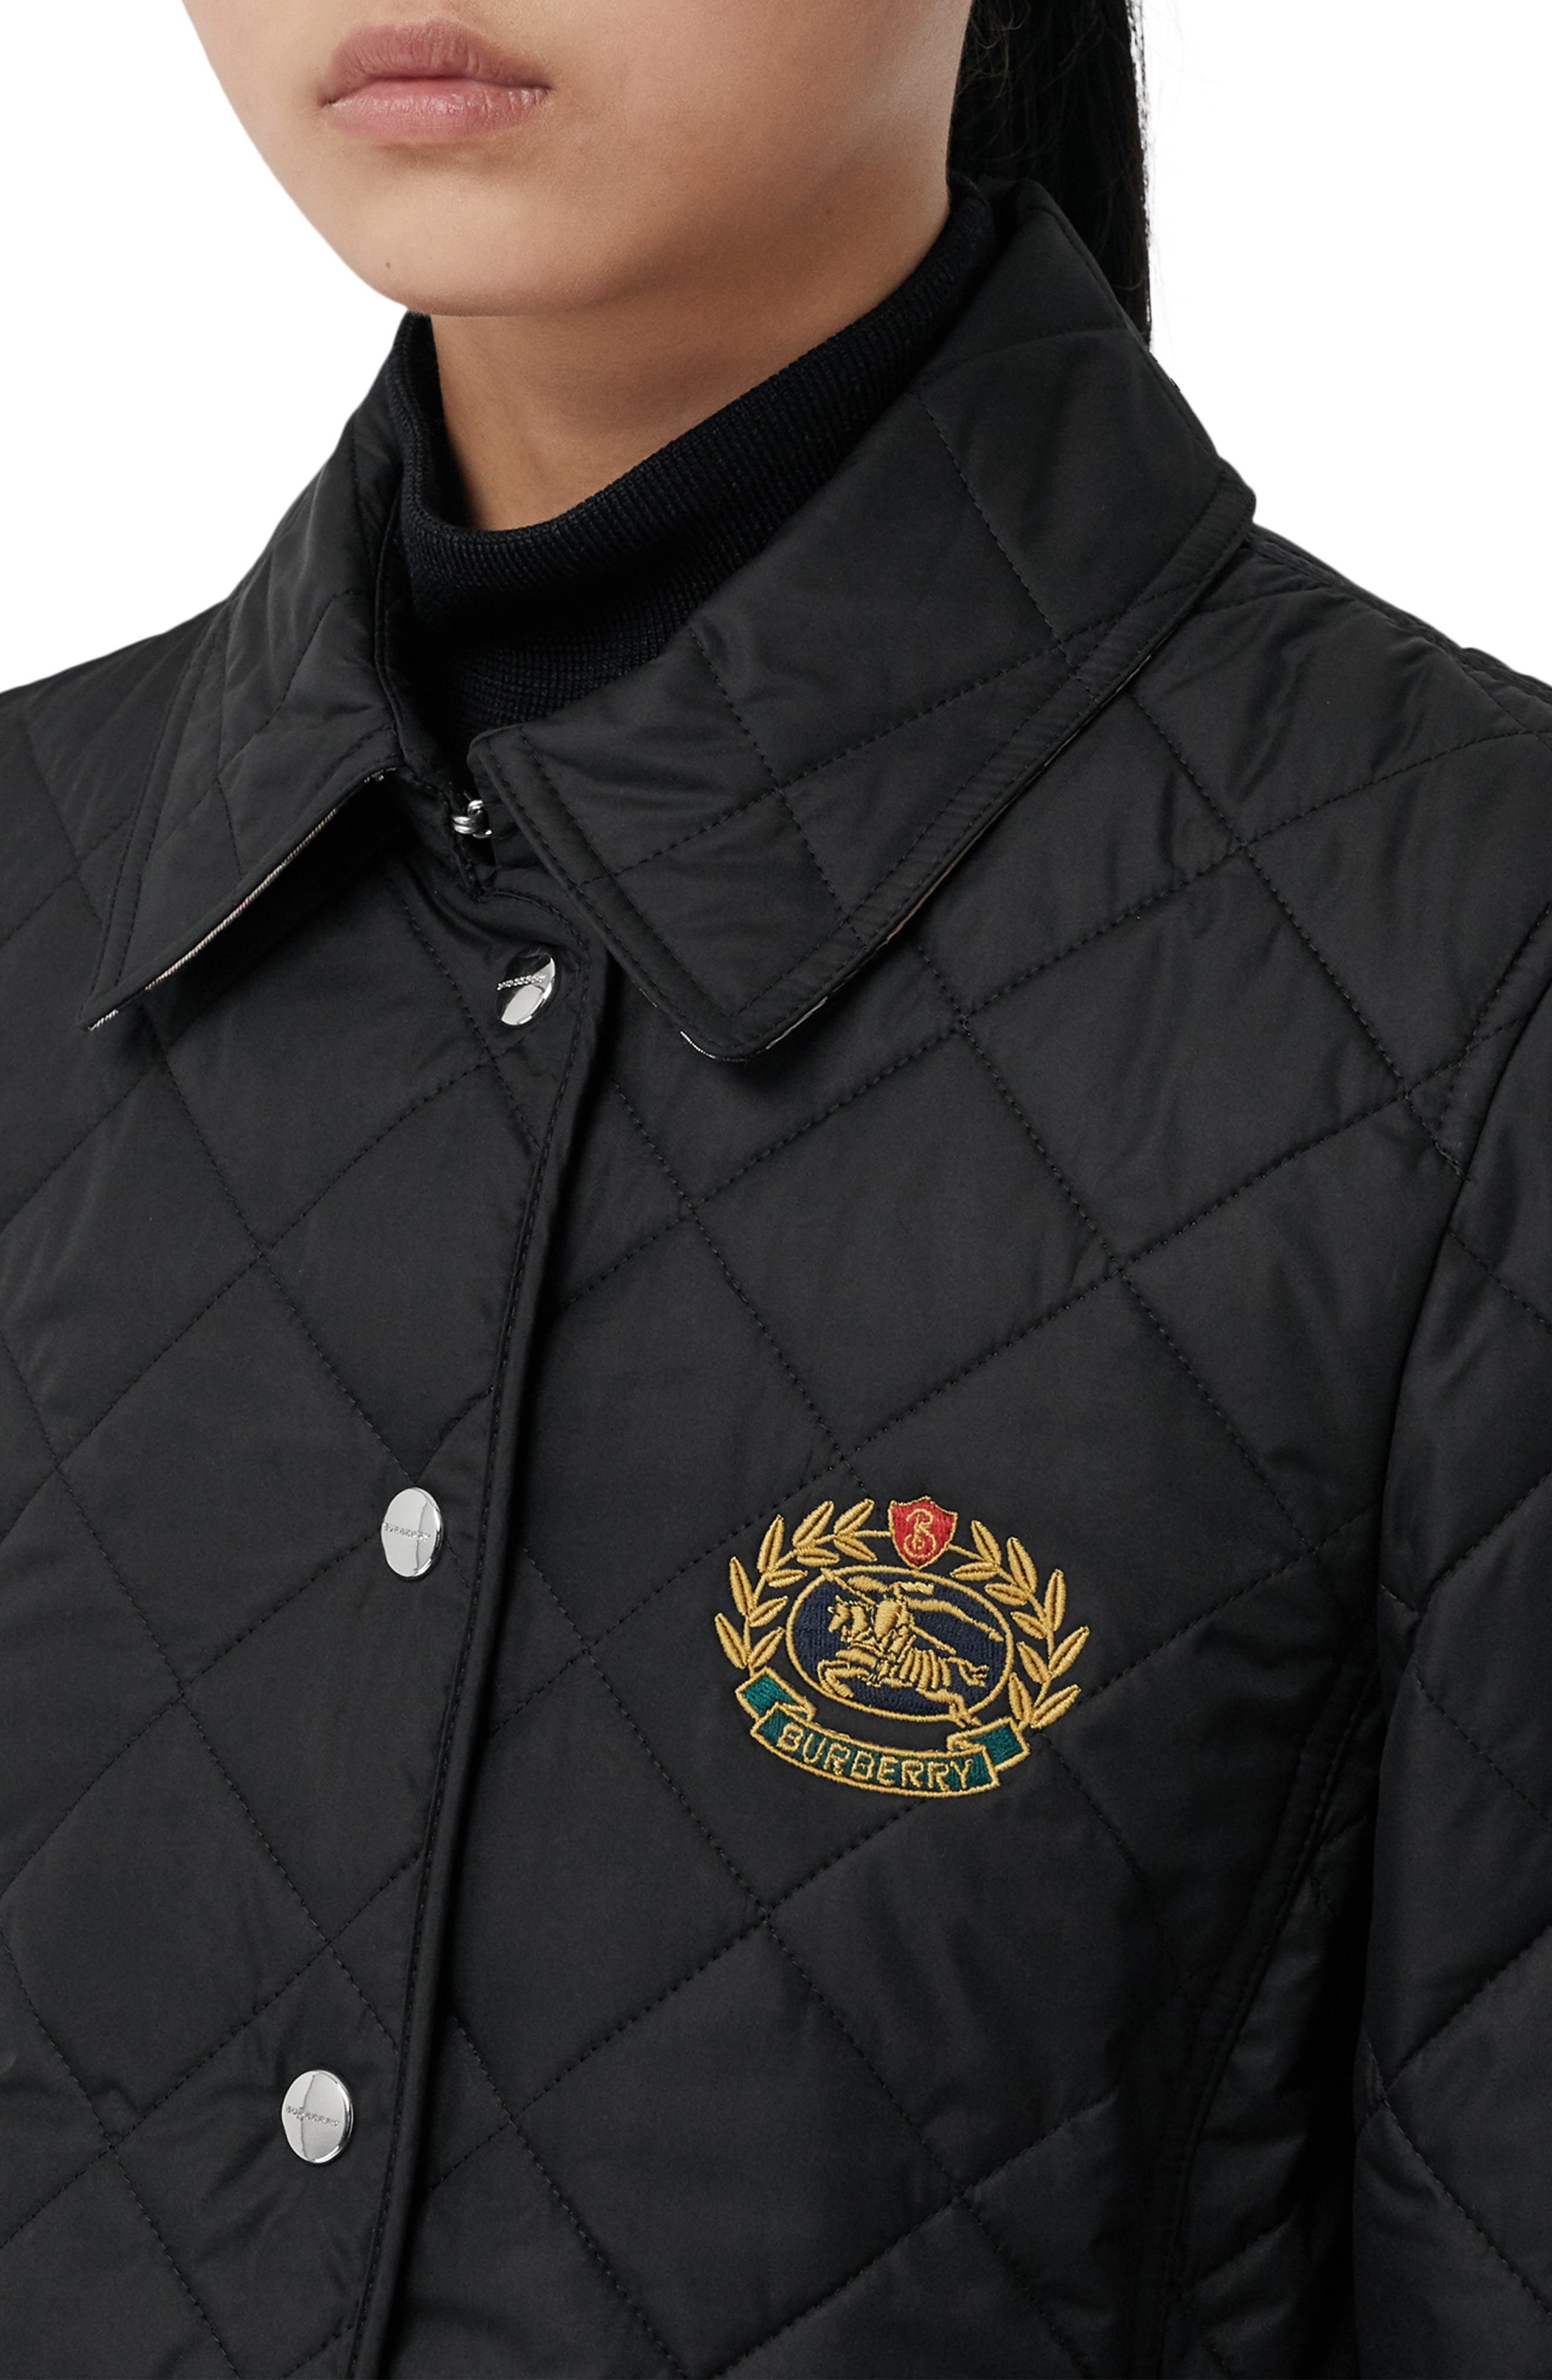 embroidered crest diamond quilted jacket